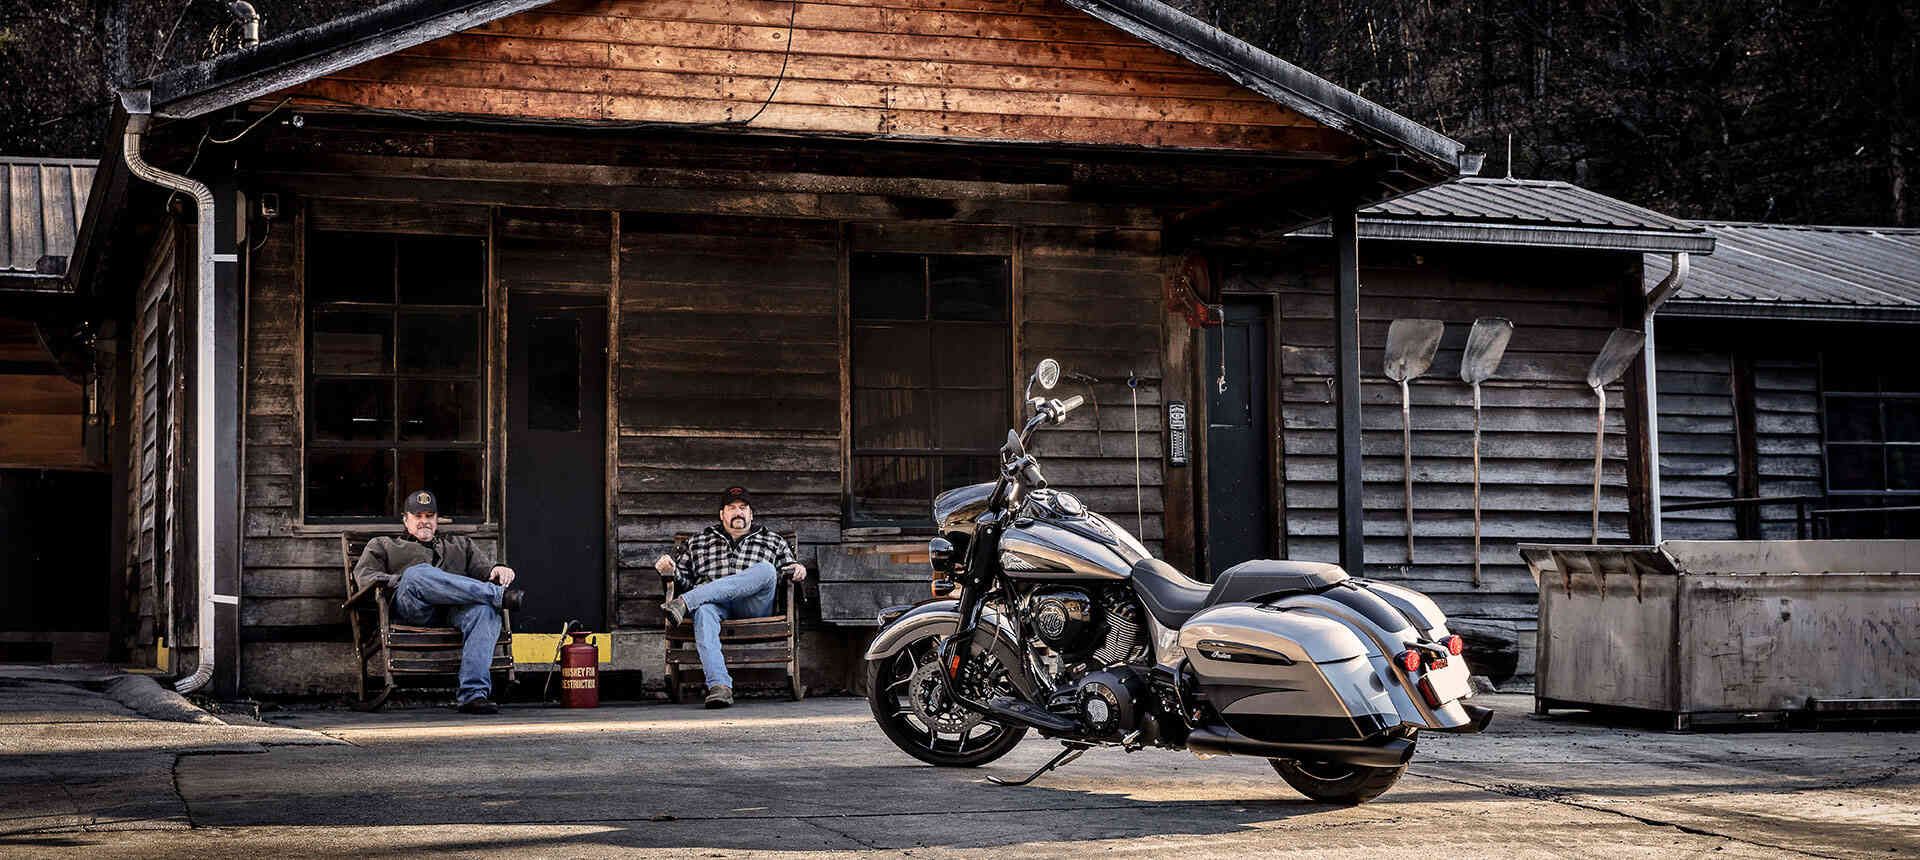 2020 Indian Motorcycle Jack Daniel’s Limited Edition Indian Springfield Dark Horse